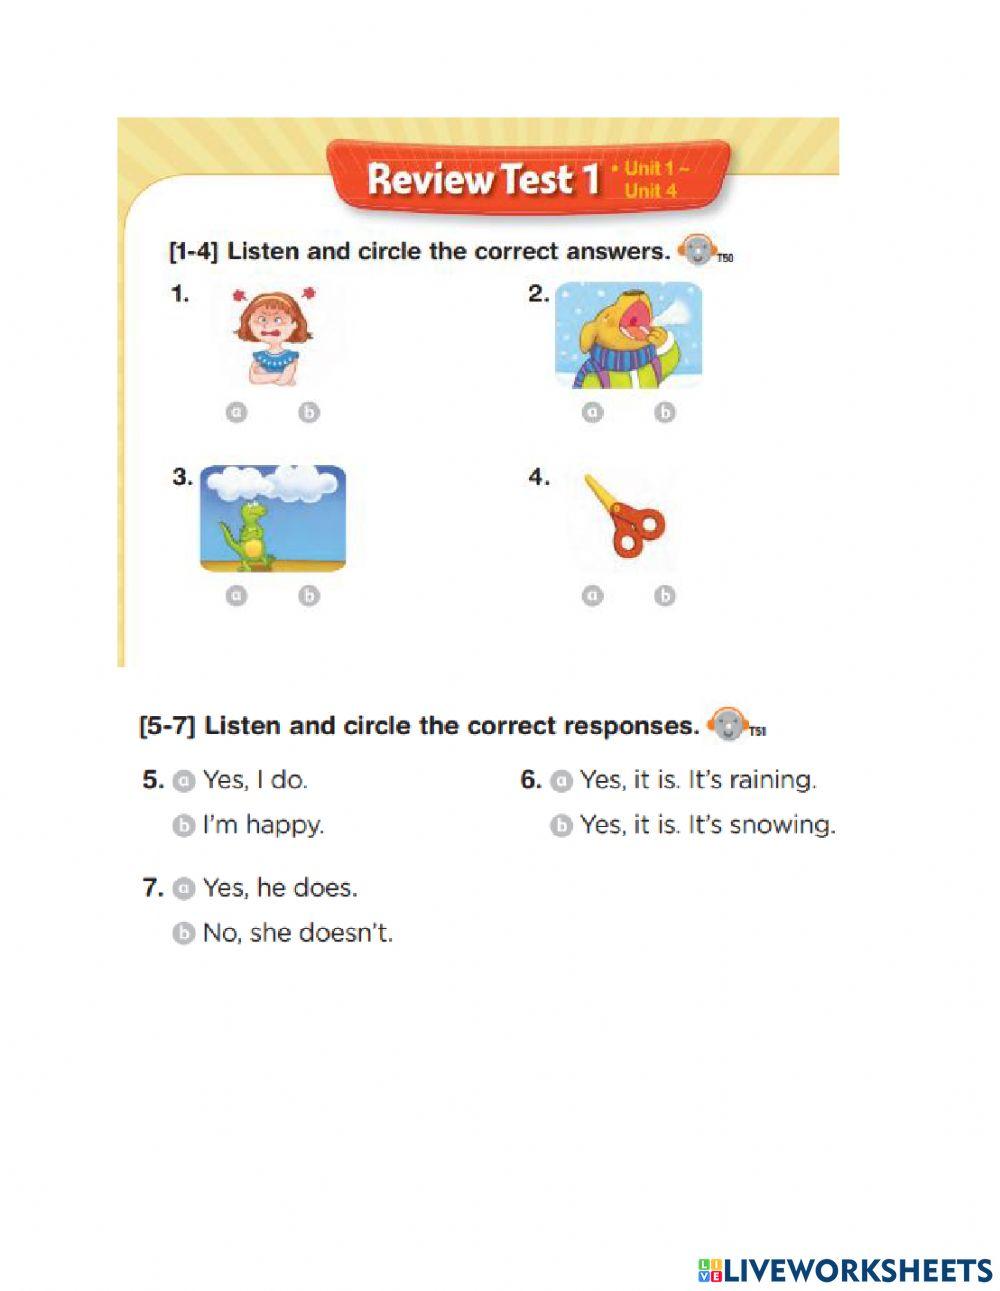 Review test 1